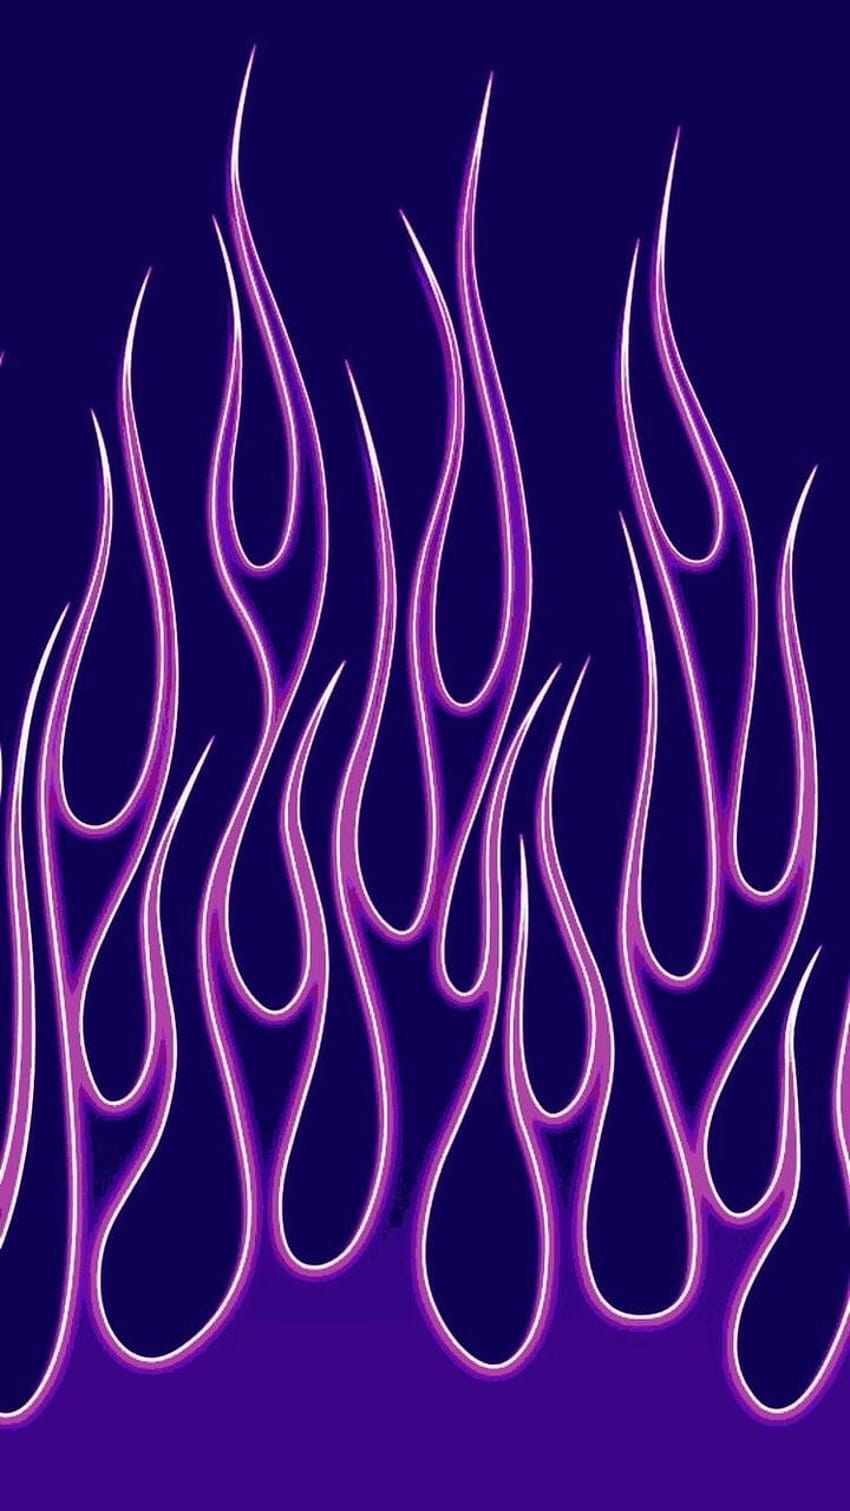 Purple Flame posted by Christopher Tremblay, aesthetic flames HD phone wallpaper